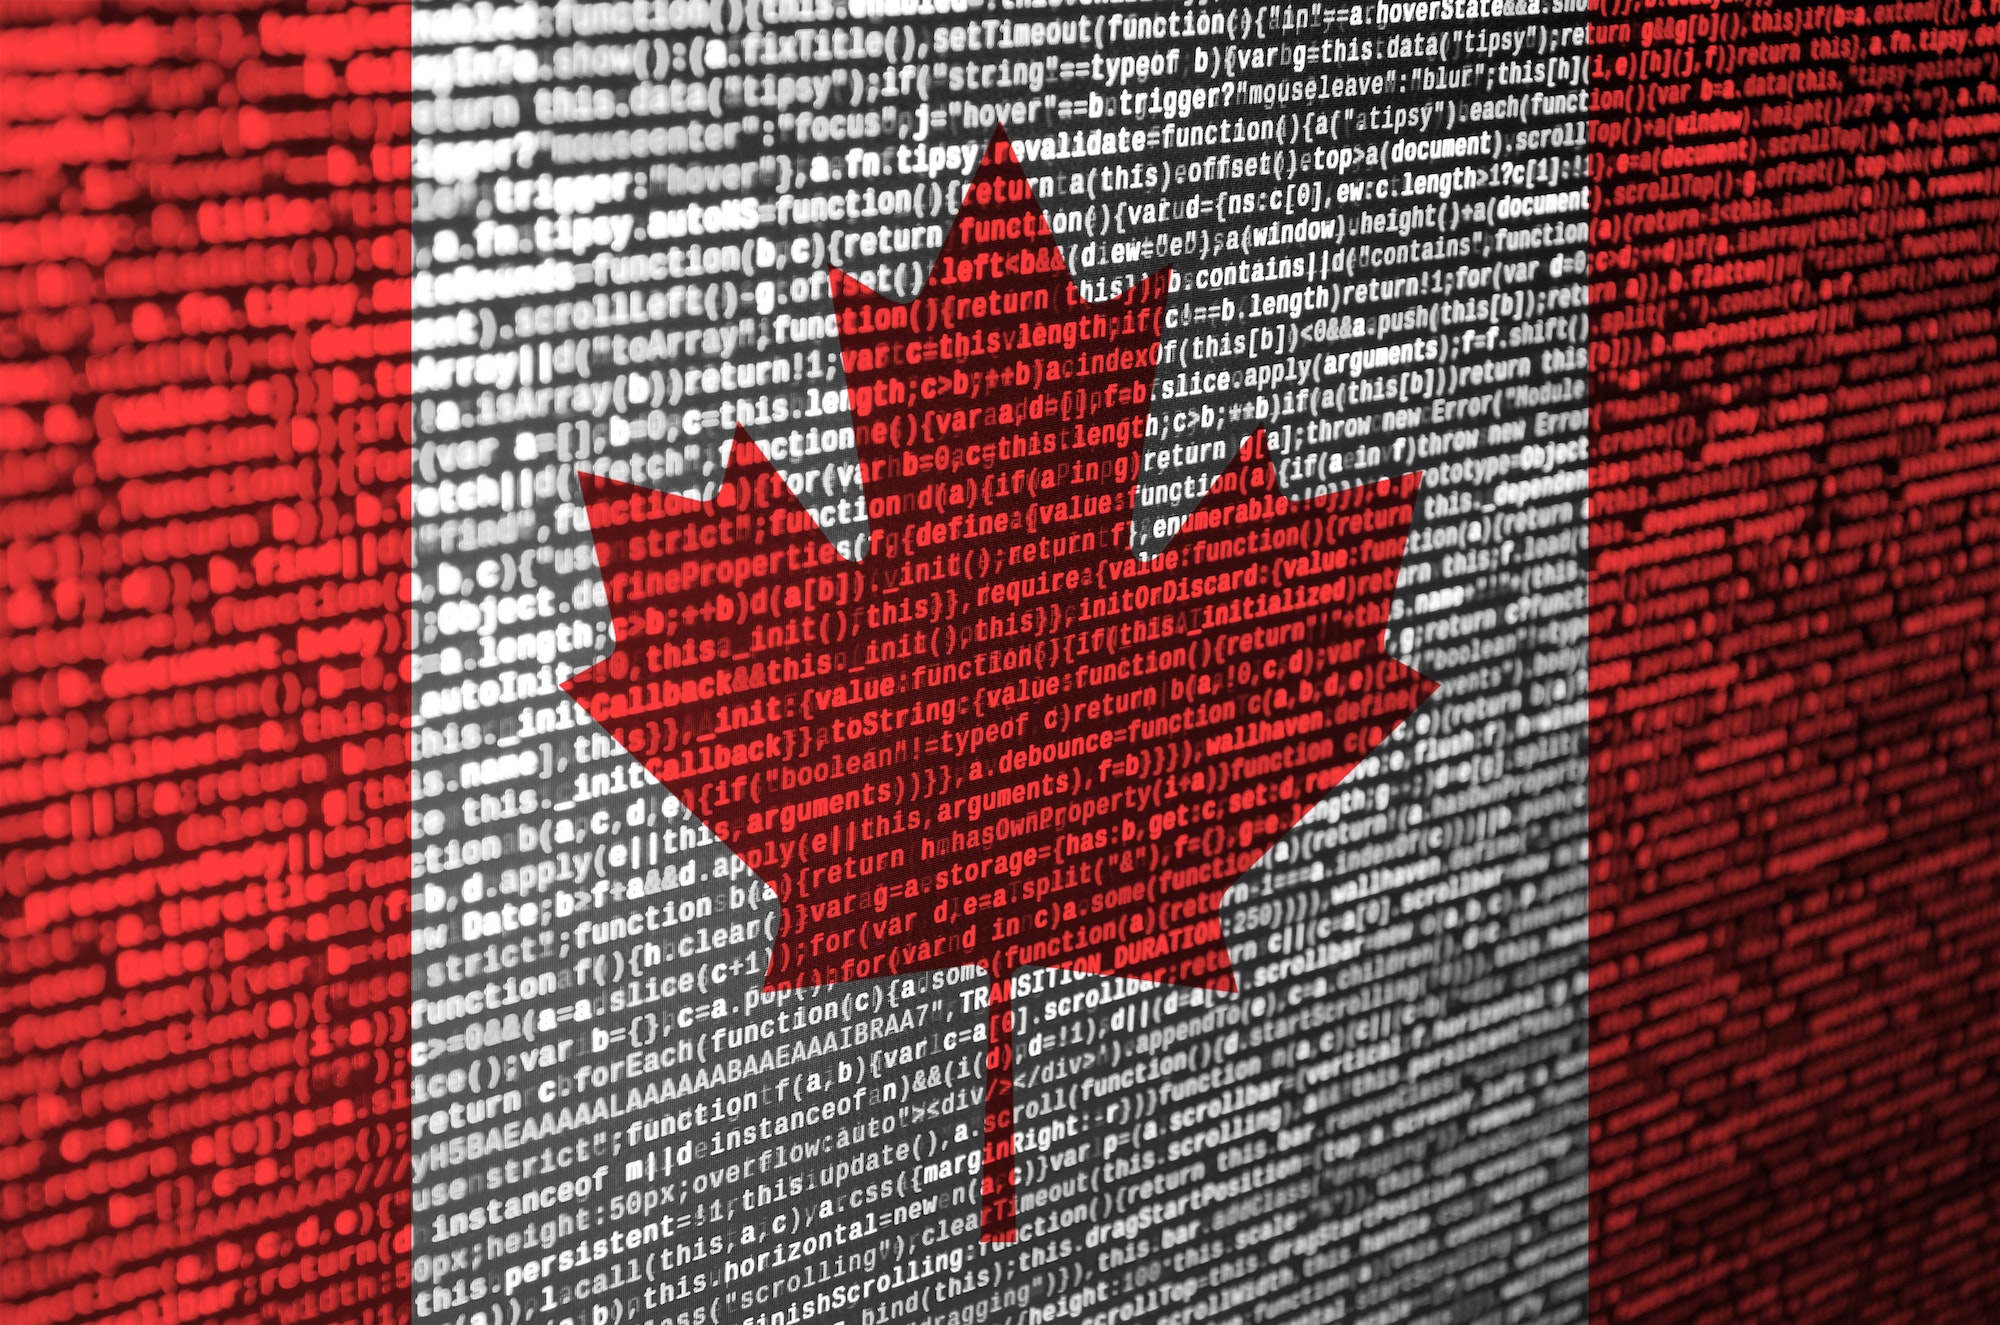 Canada flag is depicted on the screen with the program code